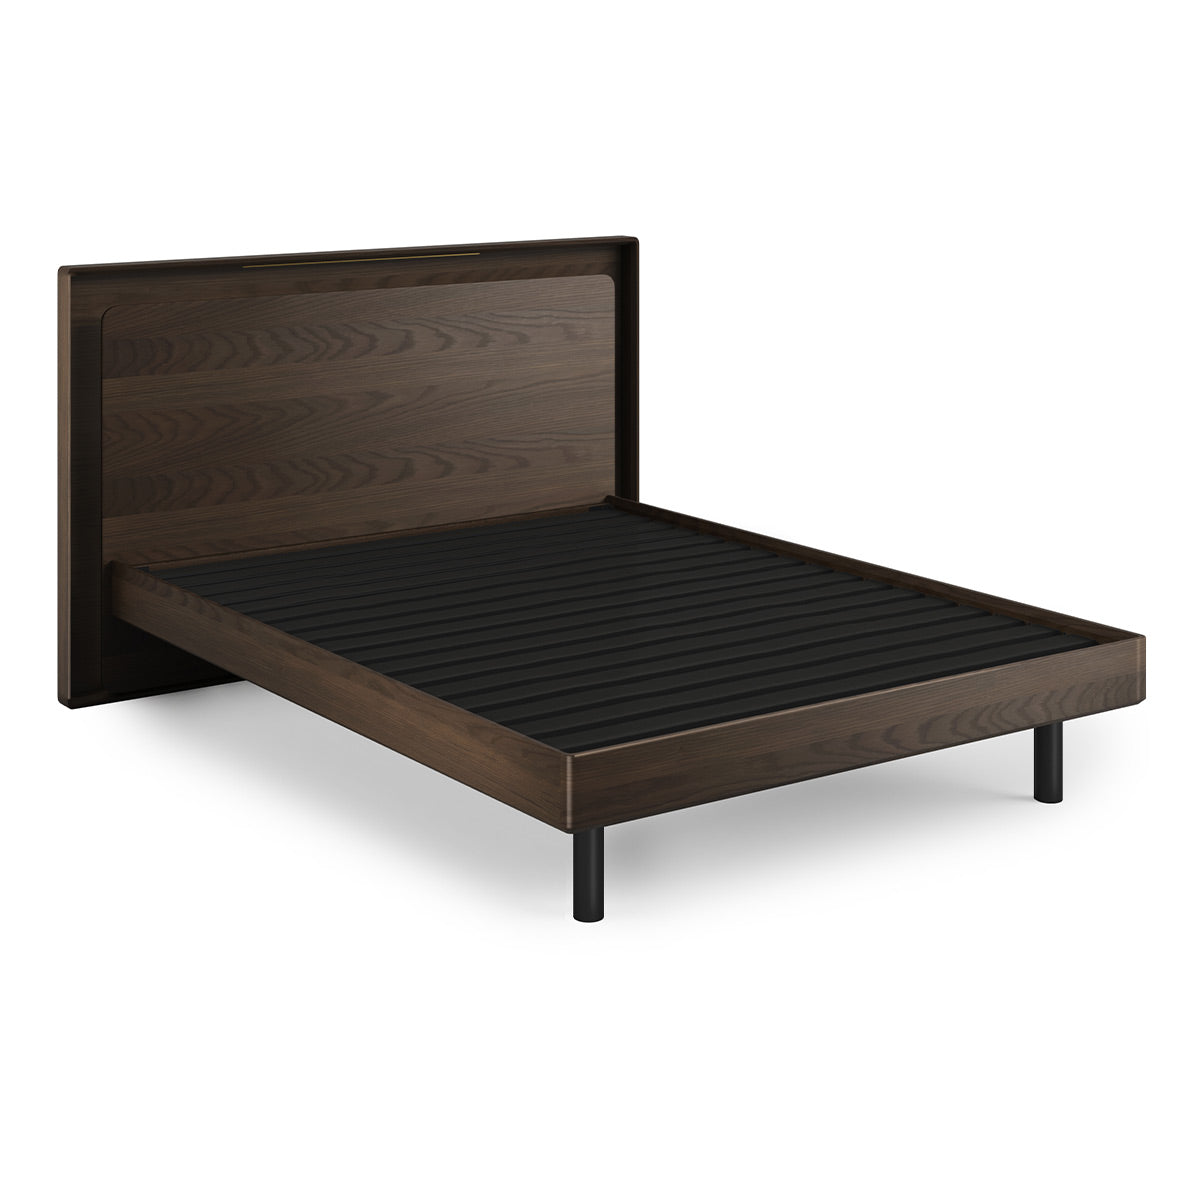 BDI Up-LINQ 9117 Queen Size Bed with Dual-Level Headboard, Dimmable Accent Lighting, and Integrated Power Stations (Toasted Oak)